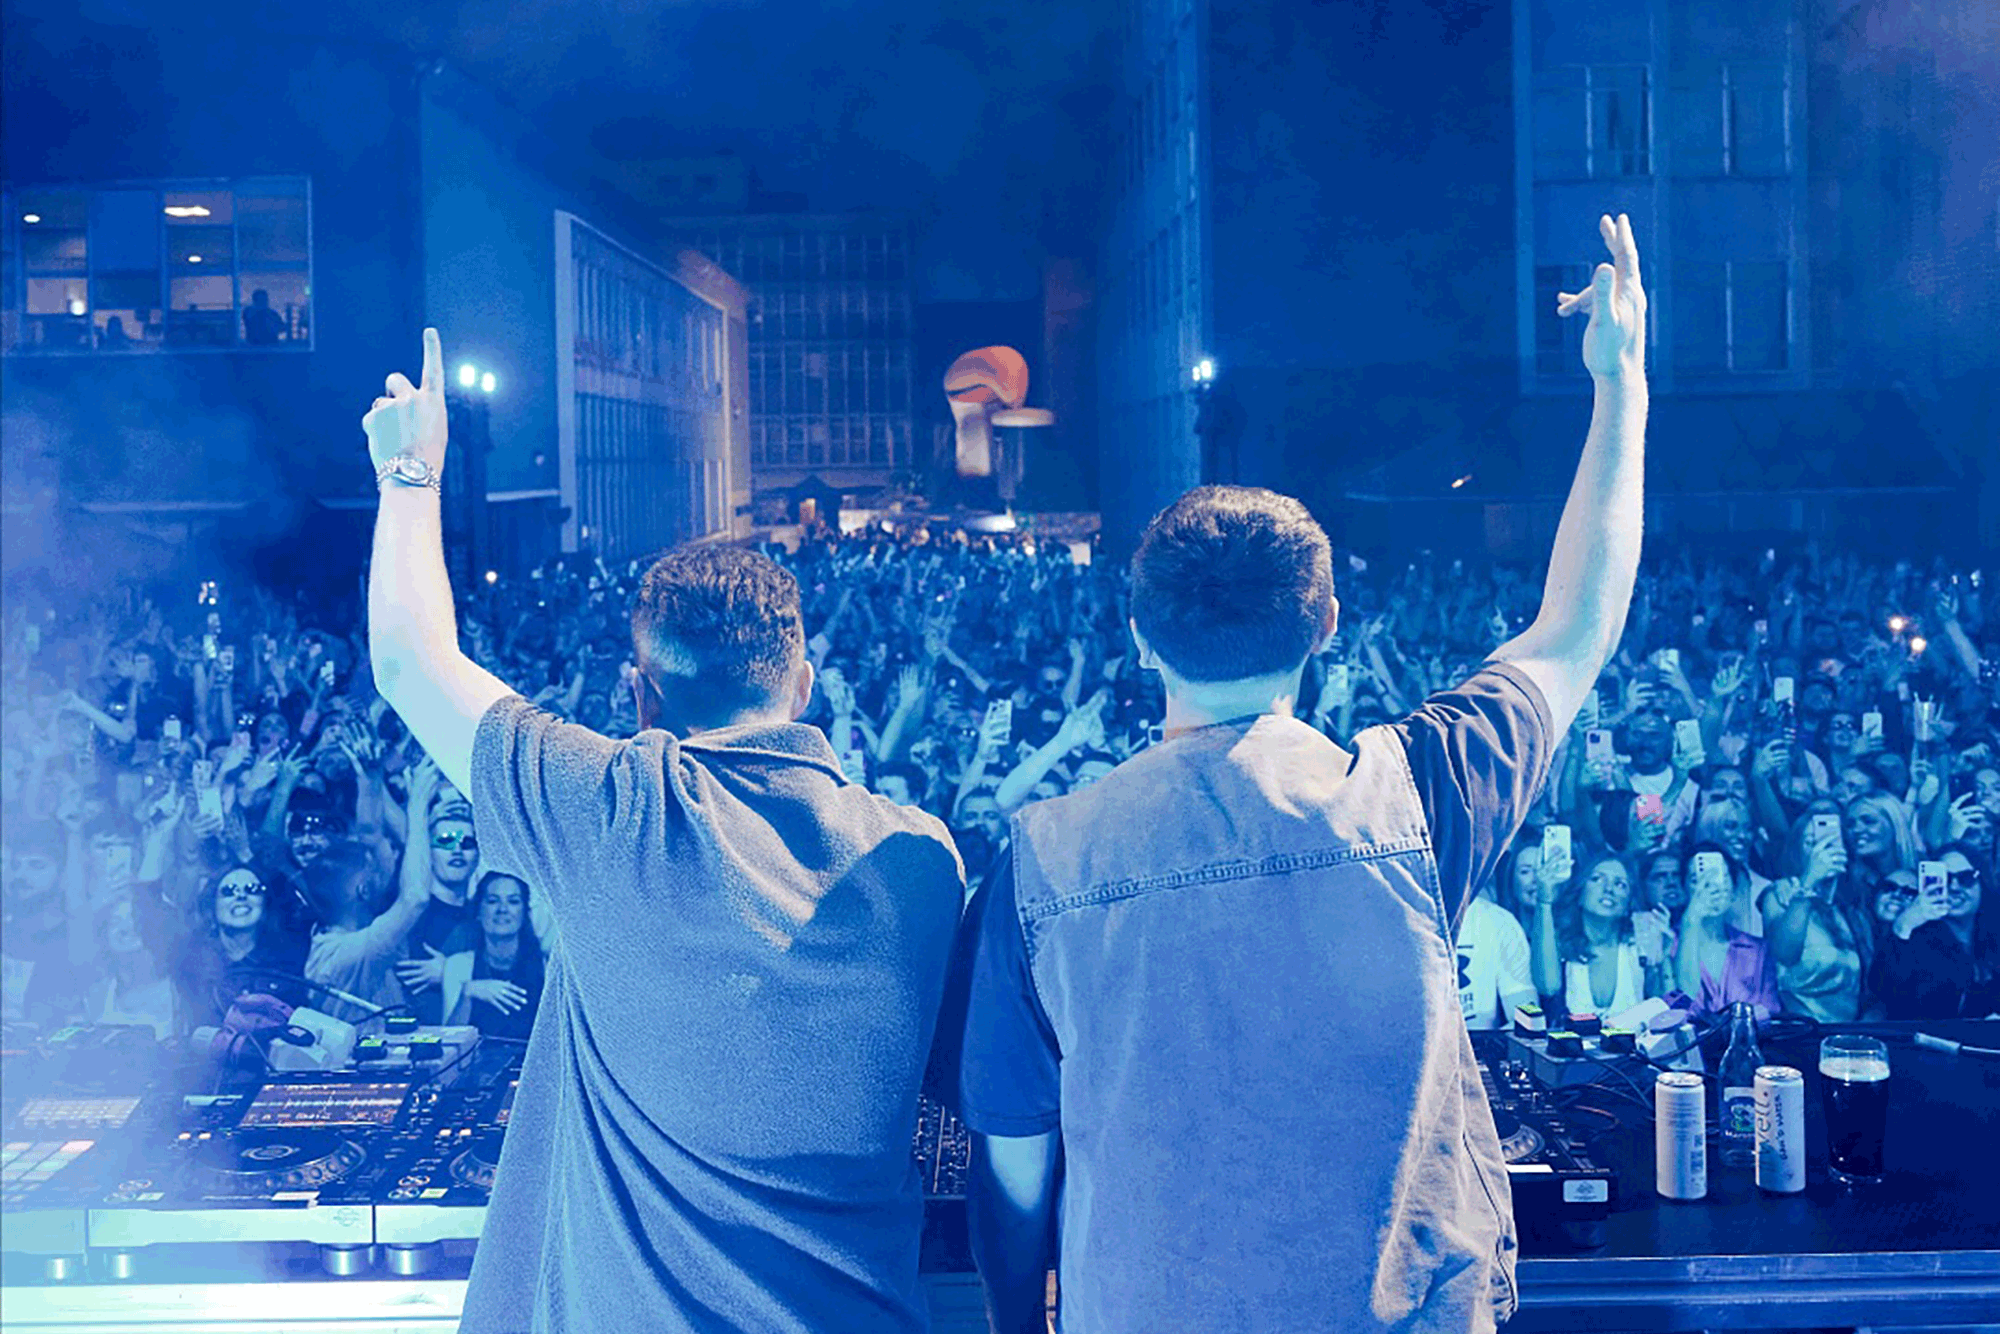 DJ duo Disclosure are photographed from behind, arms in the arm, standing on a stage in front of a large crowd